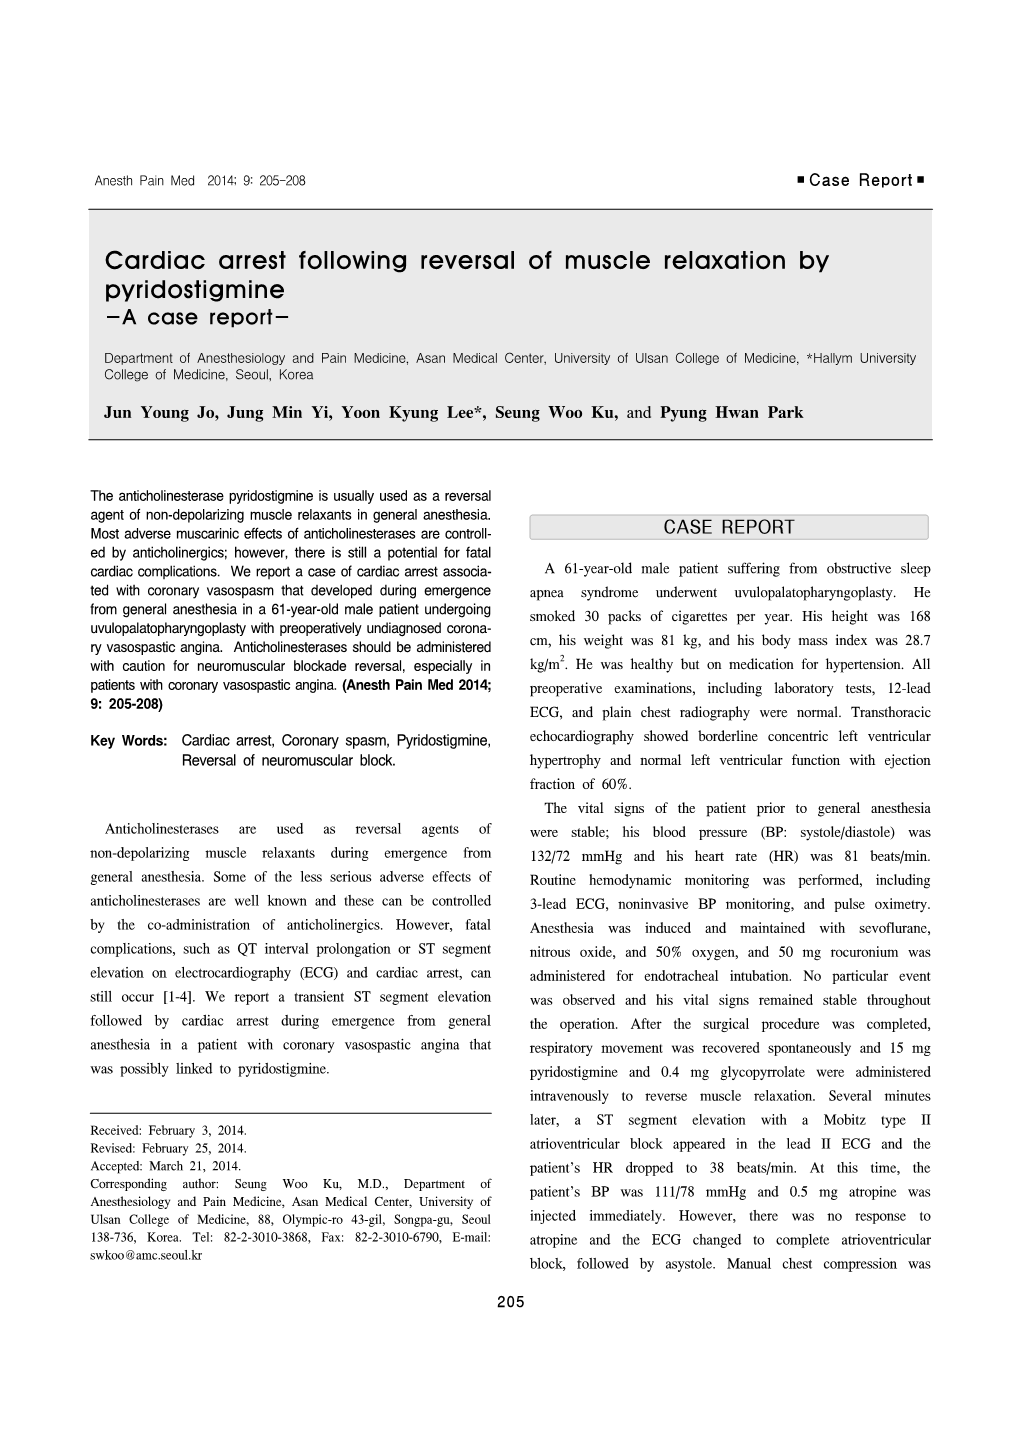 Cardiac Arrest Following Reversal of Muscle Relaxation by Pyridostigmine -A Case Report